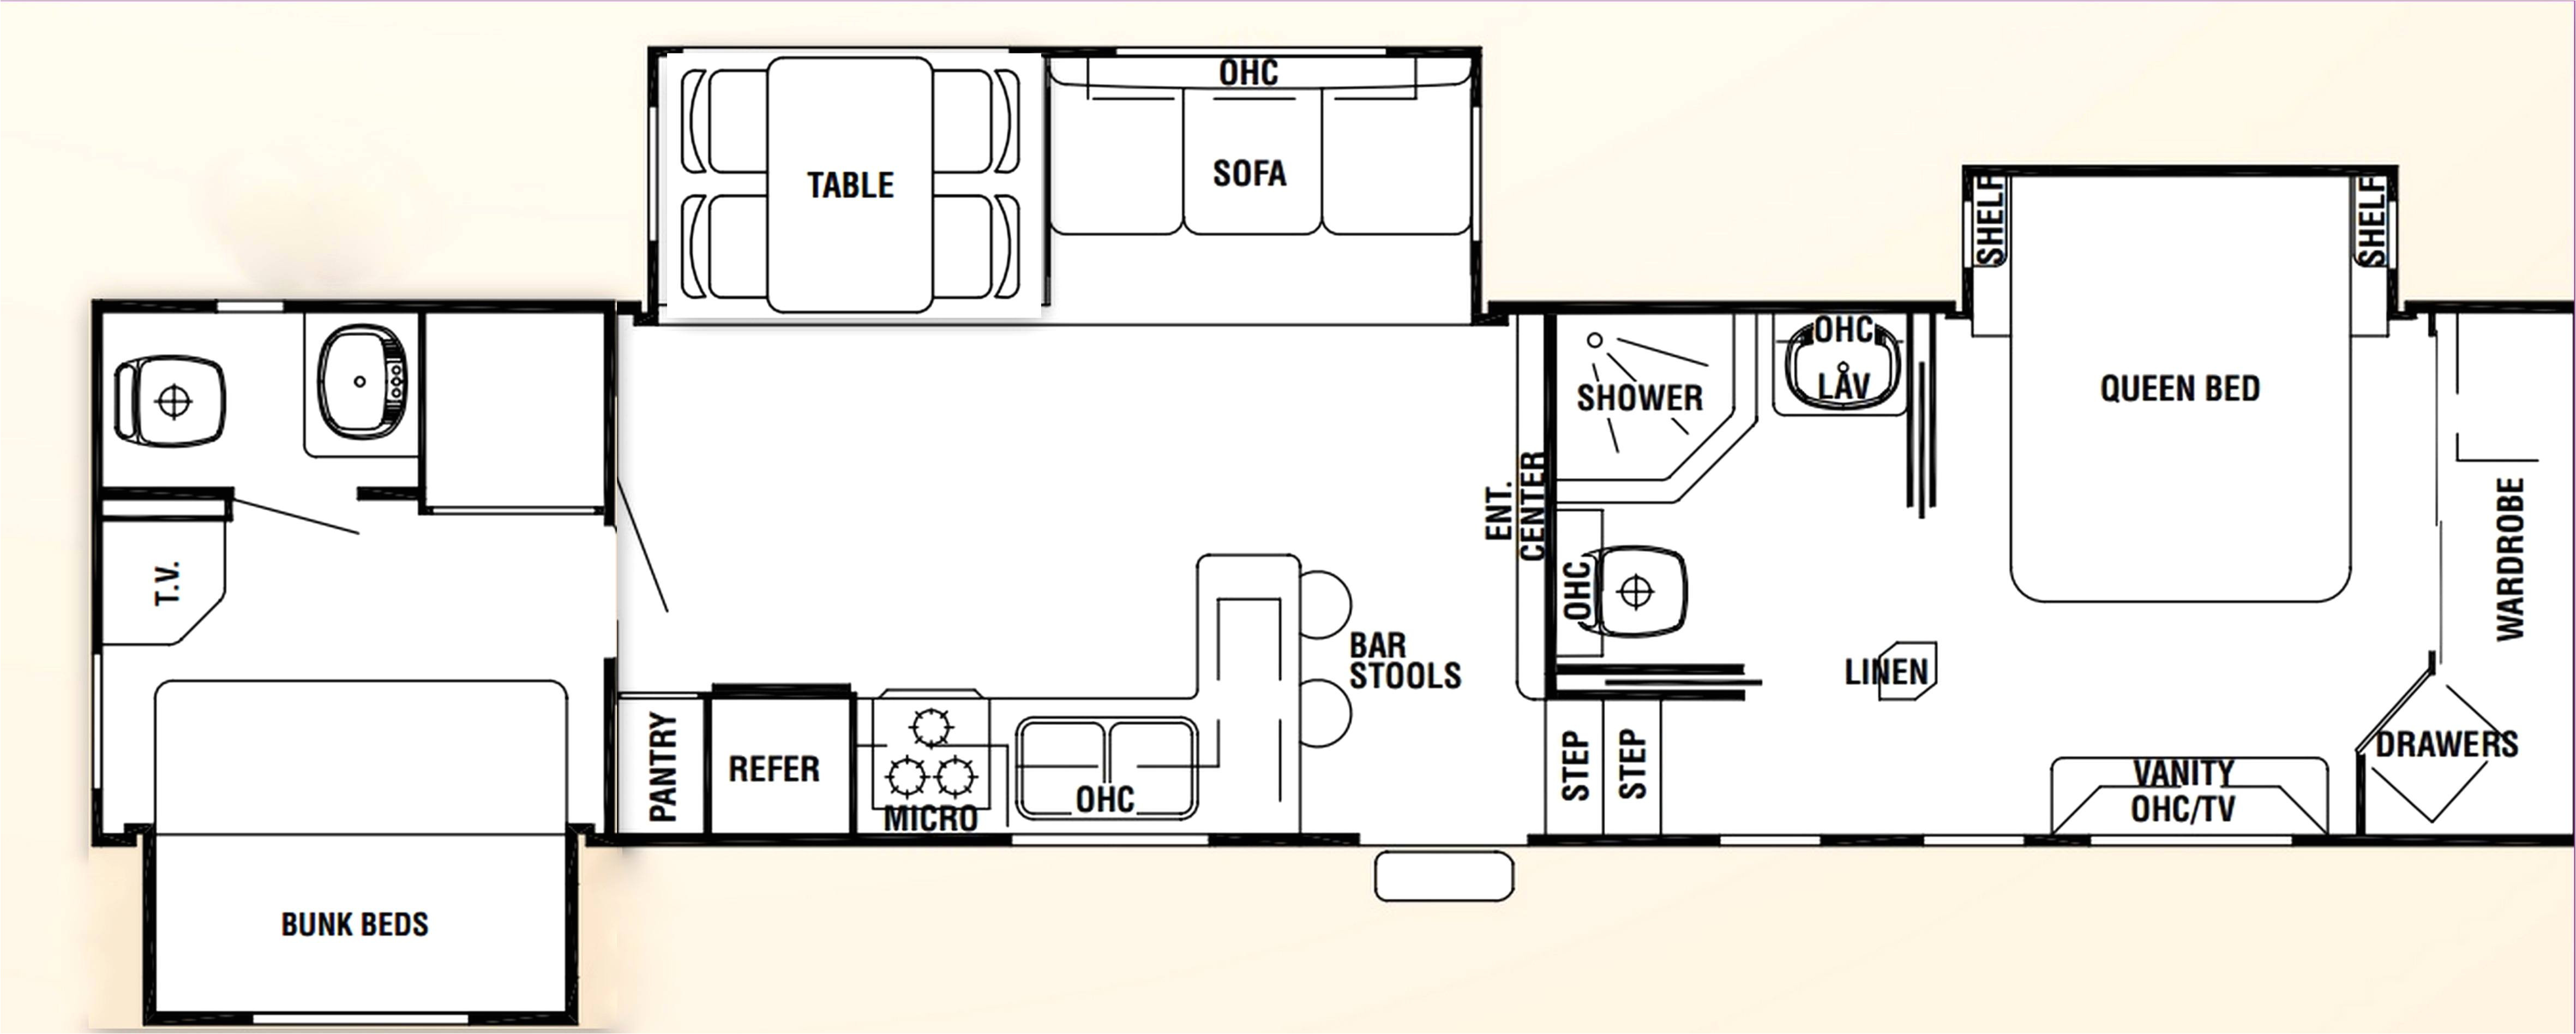 compact house floor plans